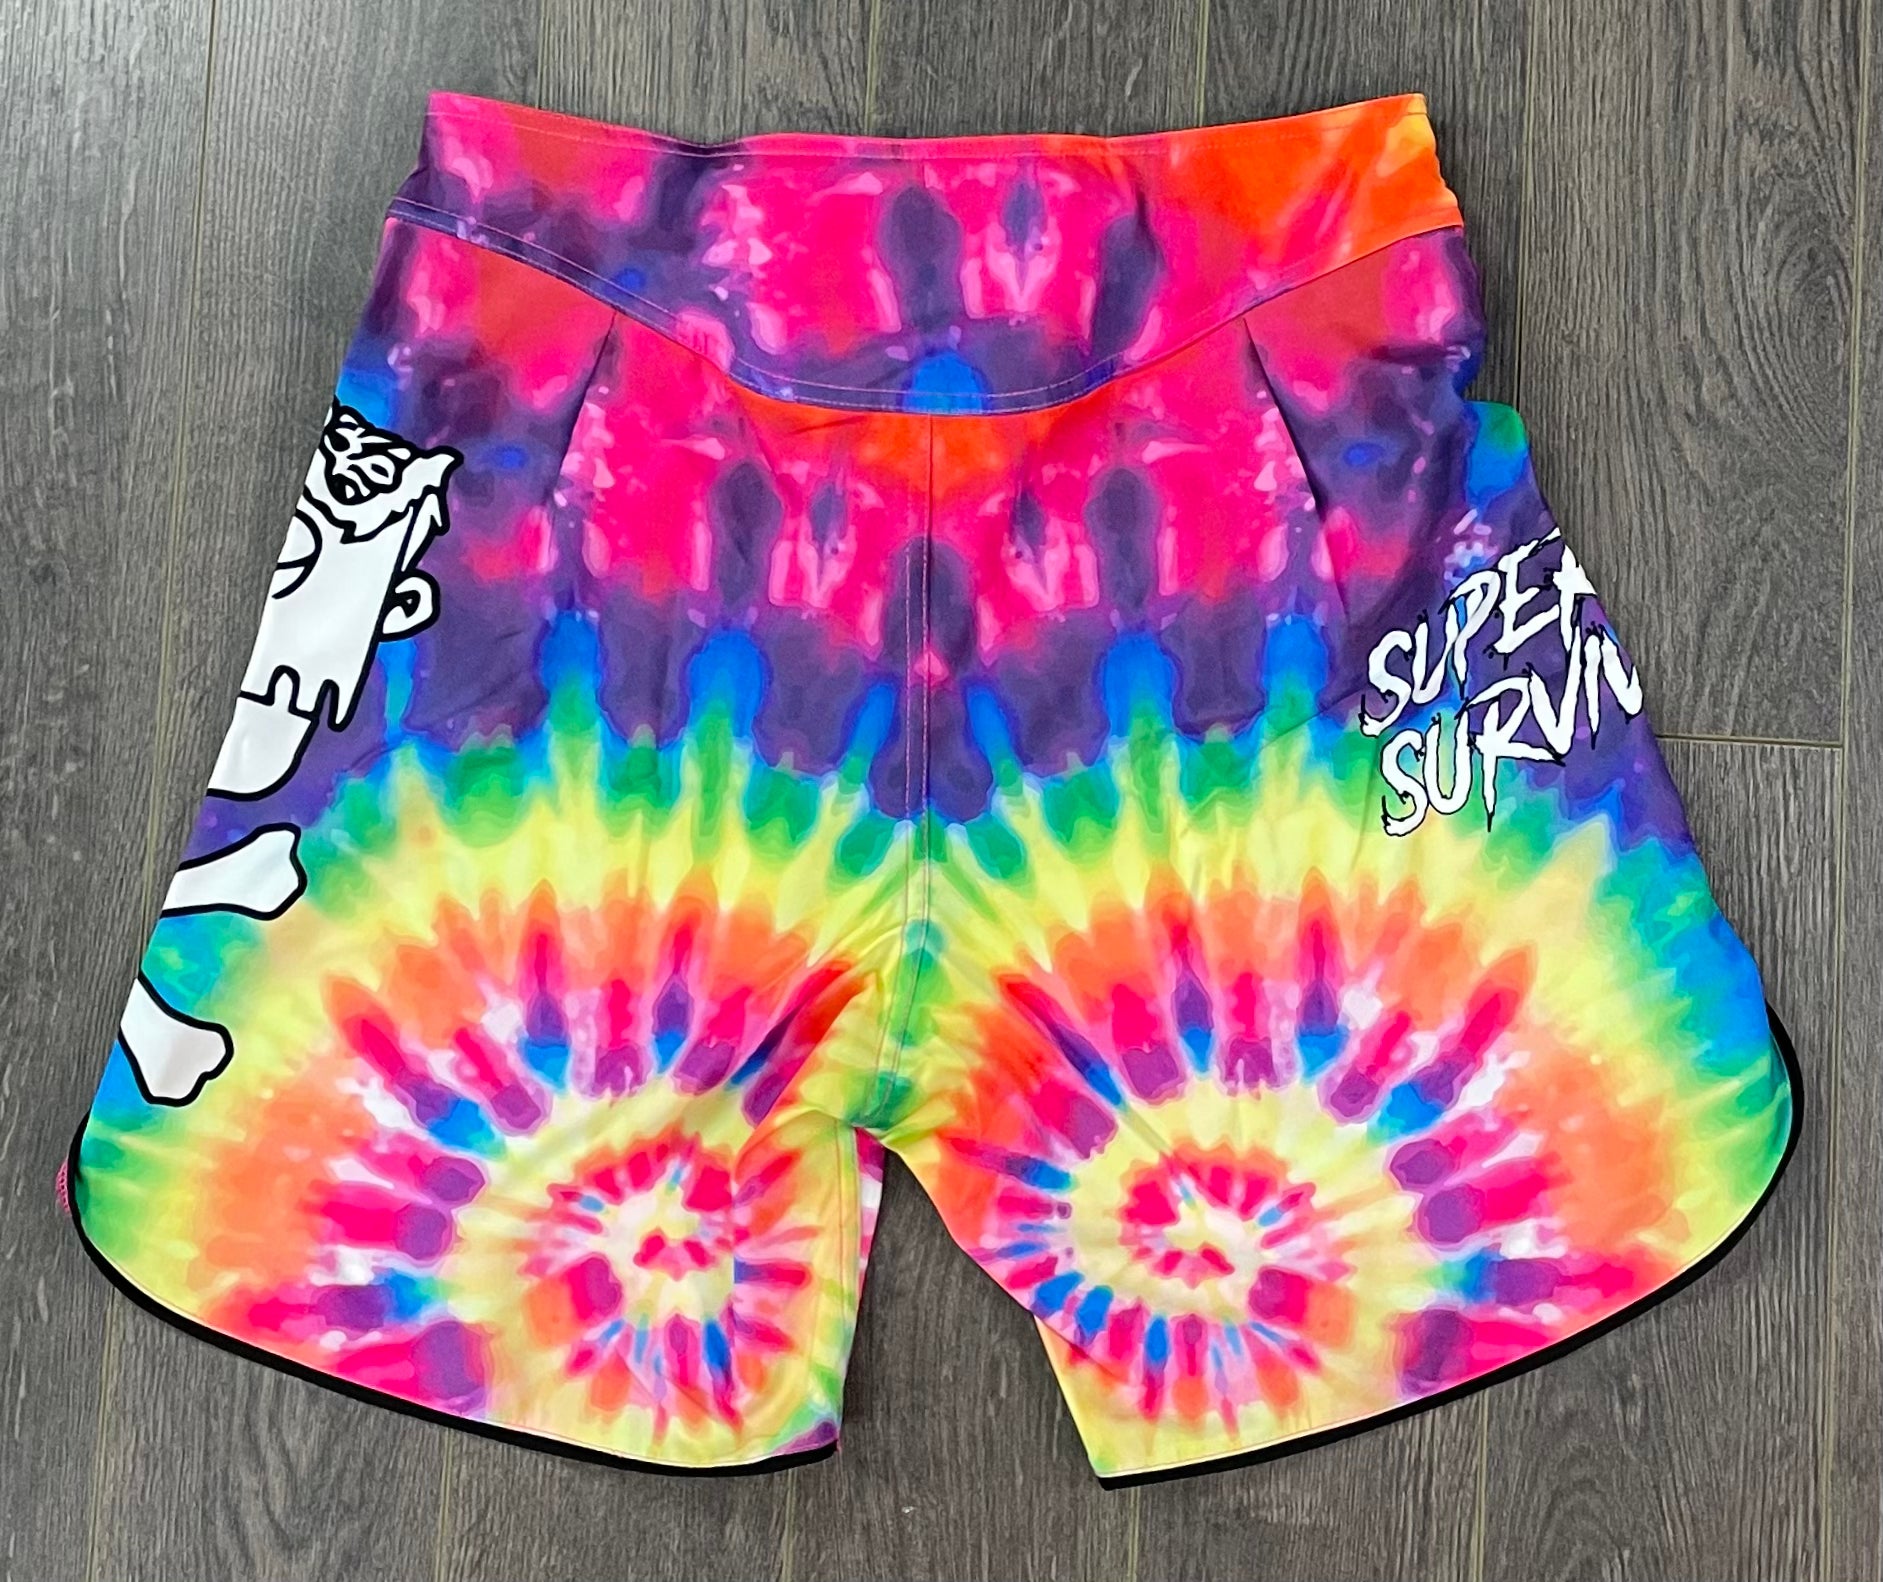 The New Funk Shorts